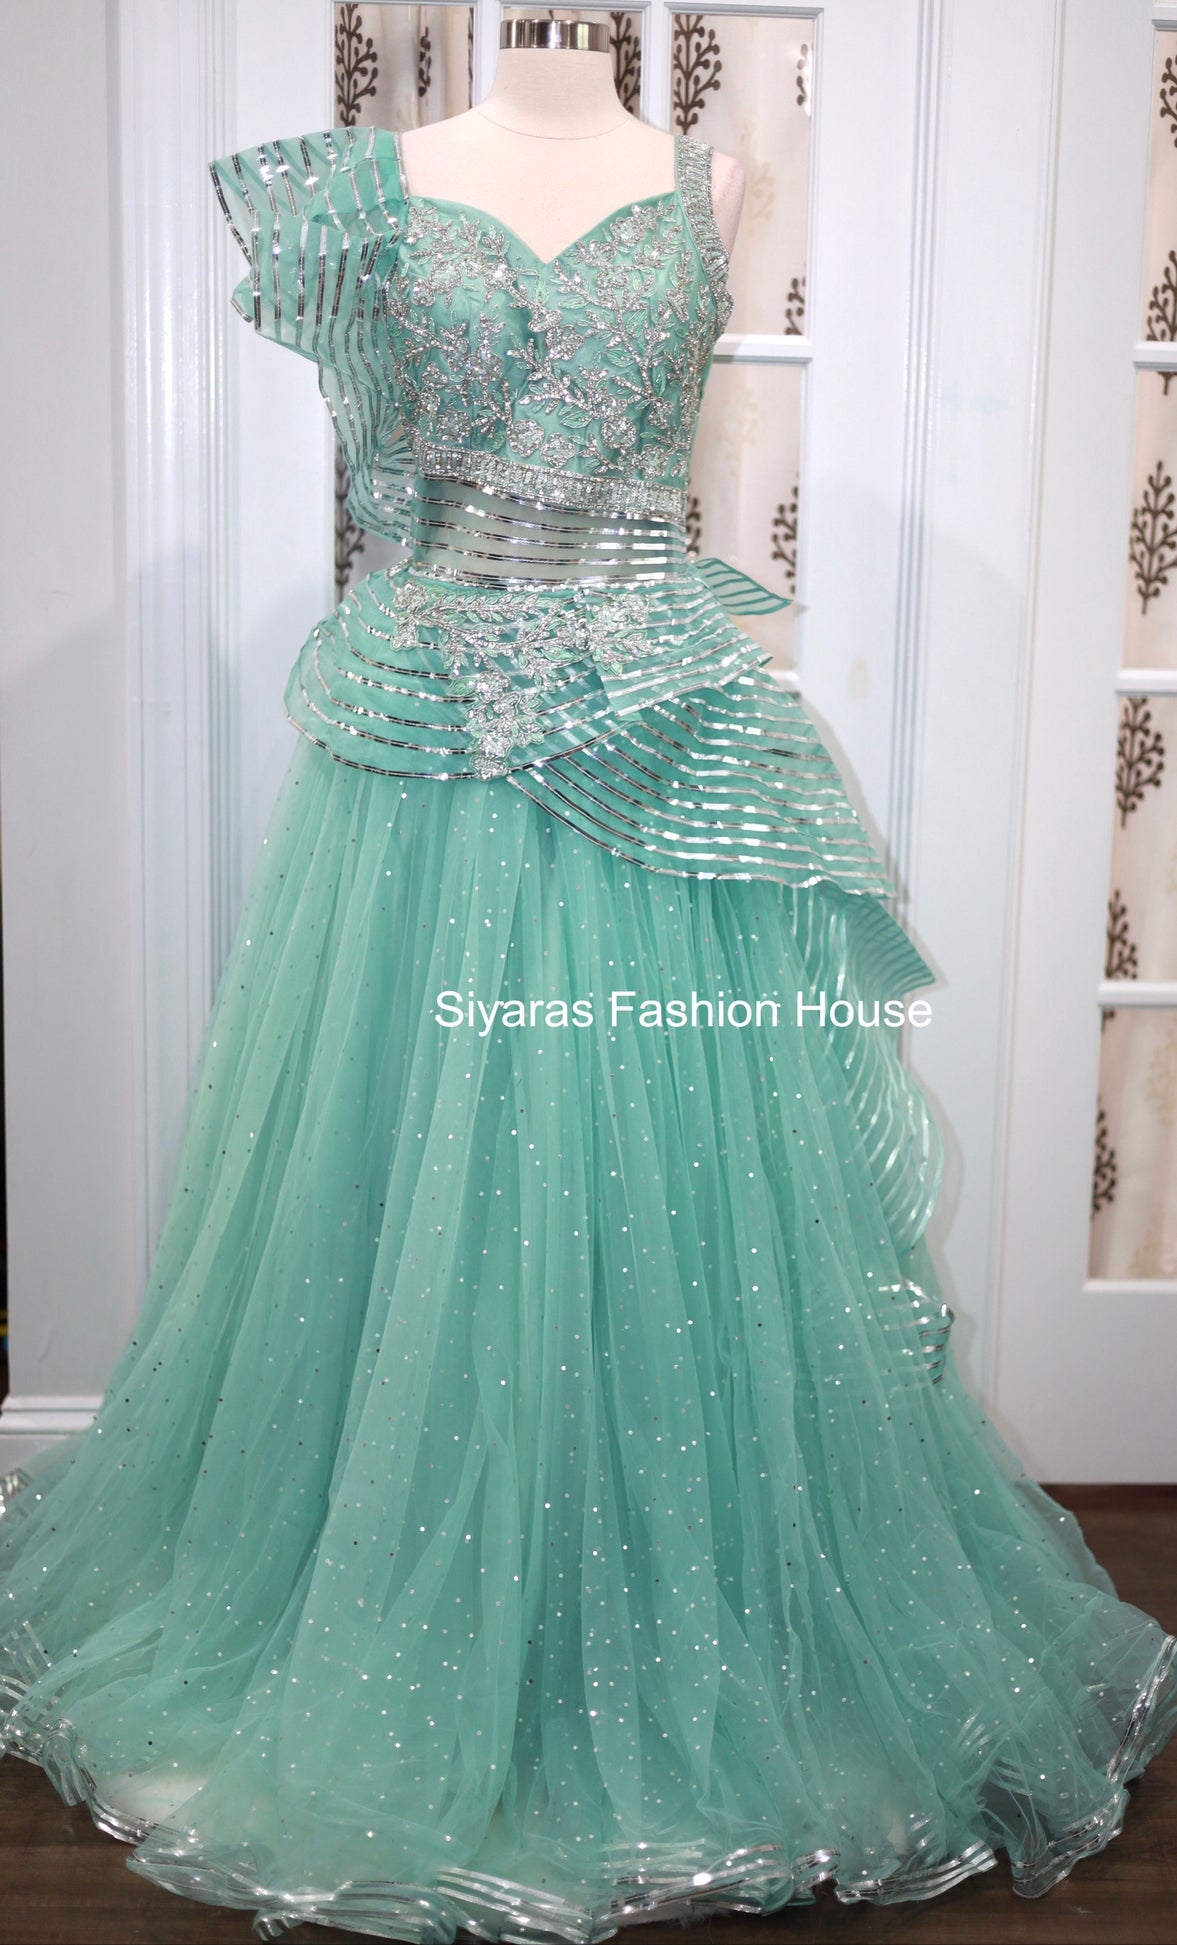 Partywear/Pageant Gown with Metallic stylish Top grand looking